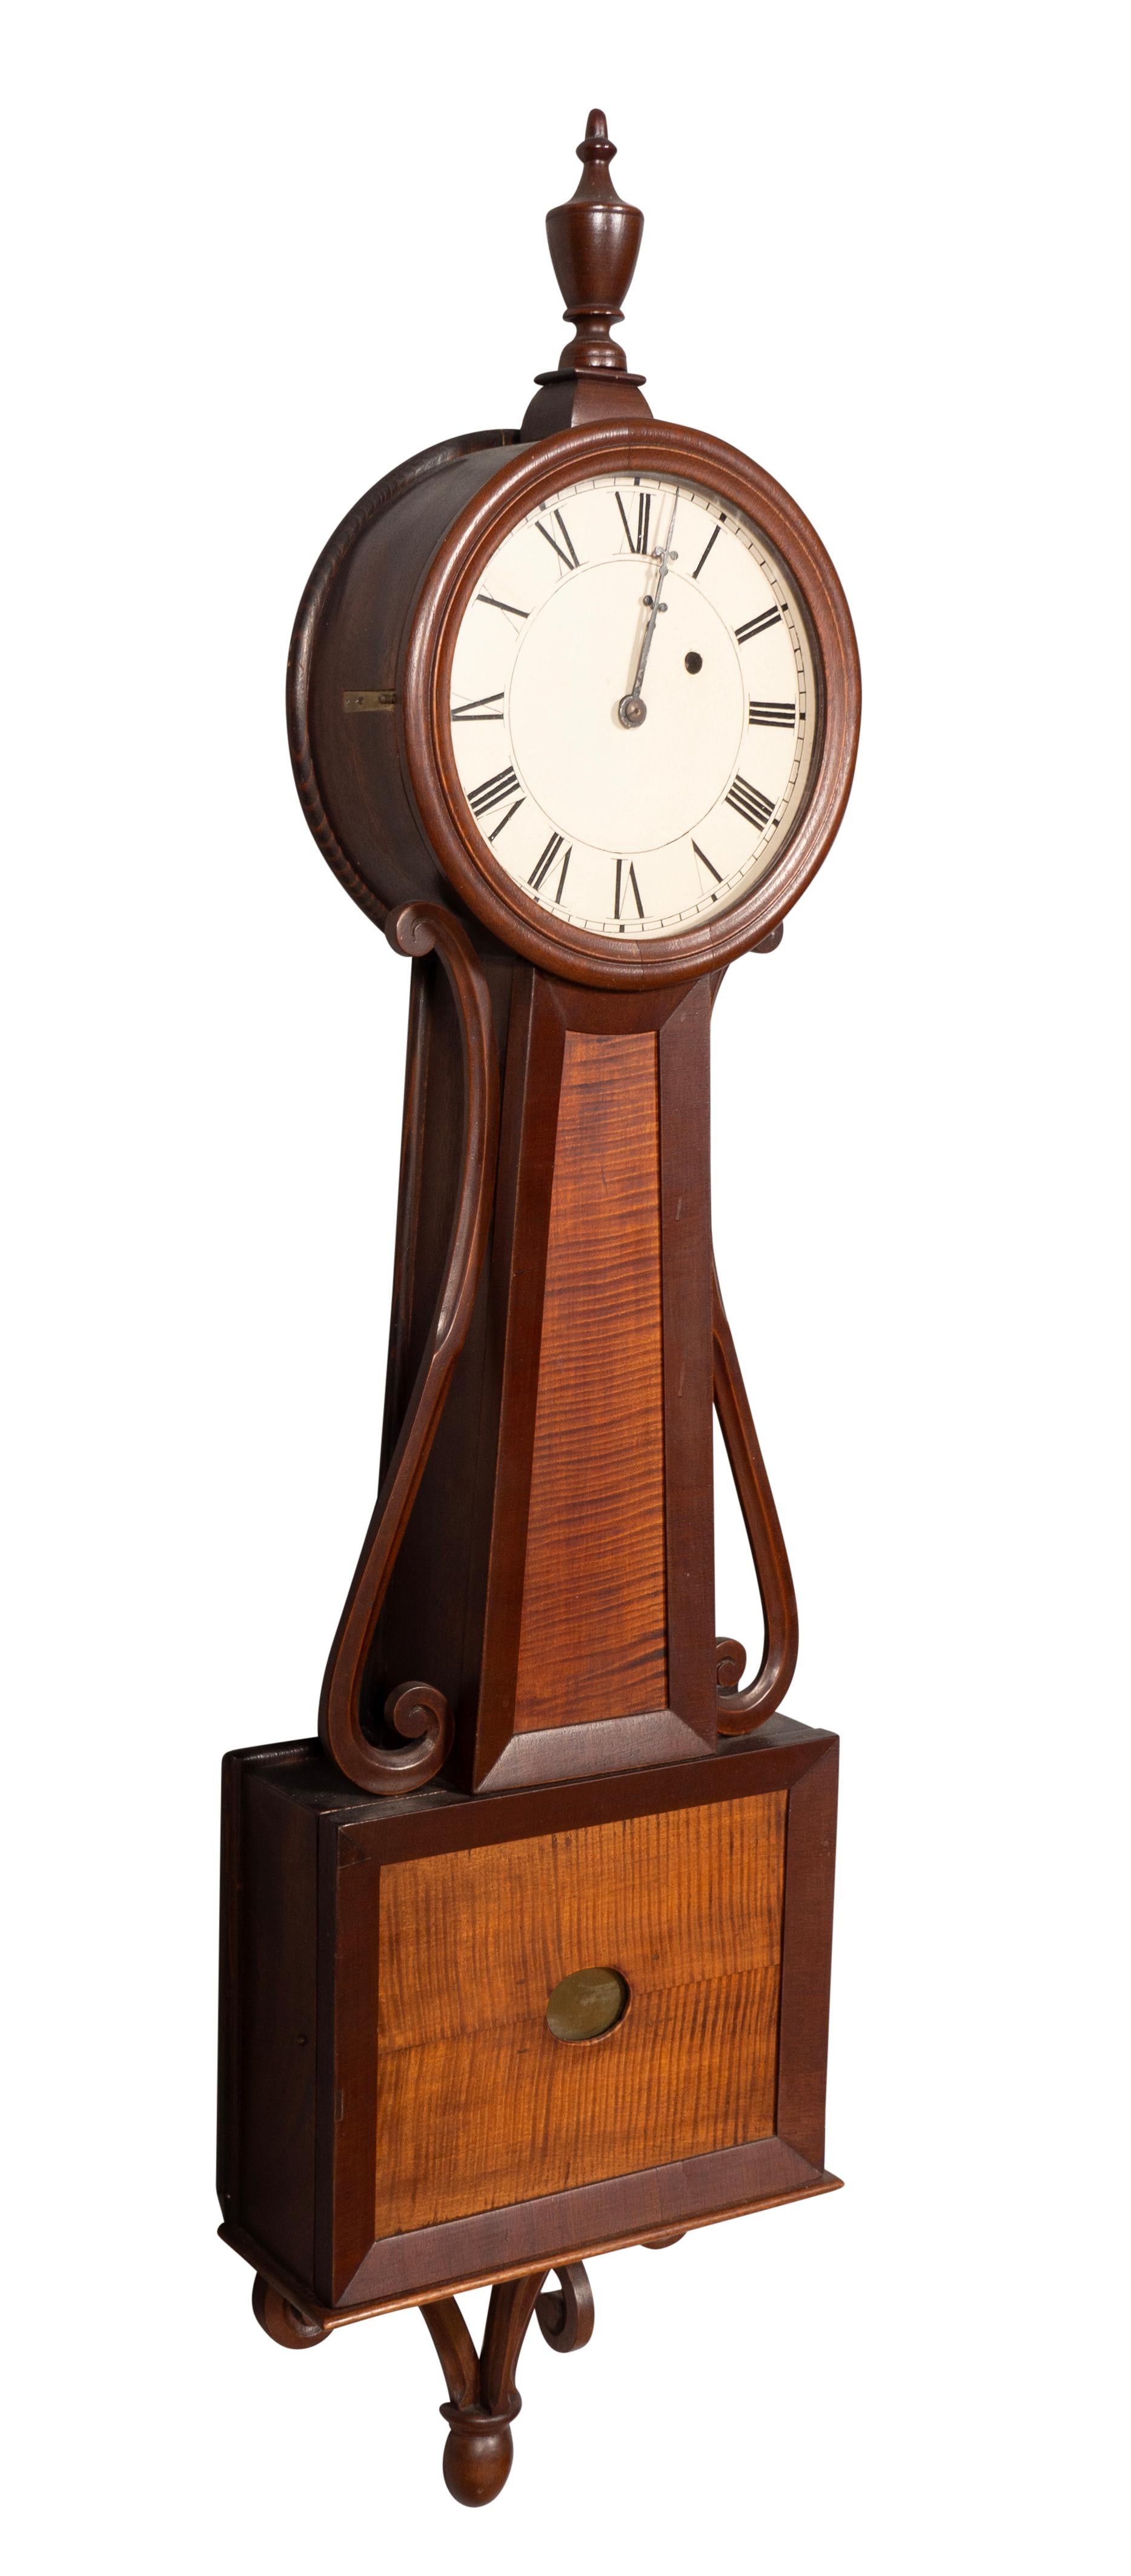 With urn finial over a round clock face with painted iron dial and 
Roman numerals. Hinged glass bezel. Waisted case with finely figured tiger maple flanked by carved mahogany side arms. Conforming door below enclosing the pendulum base visible